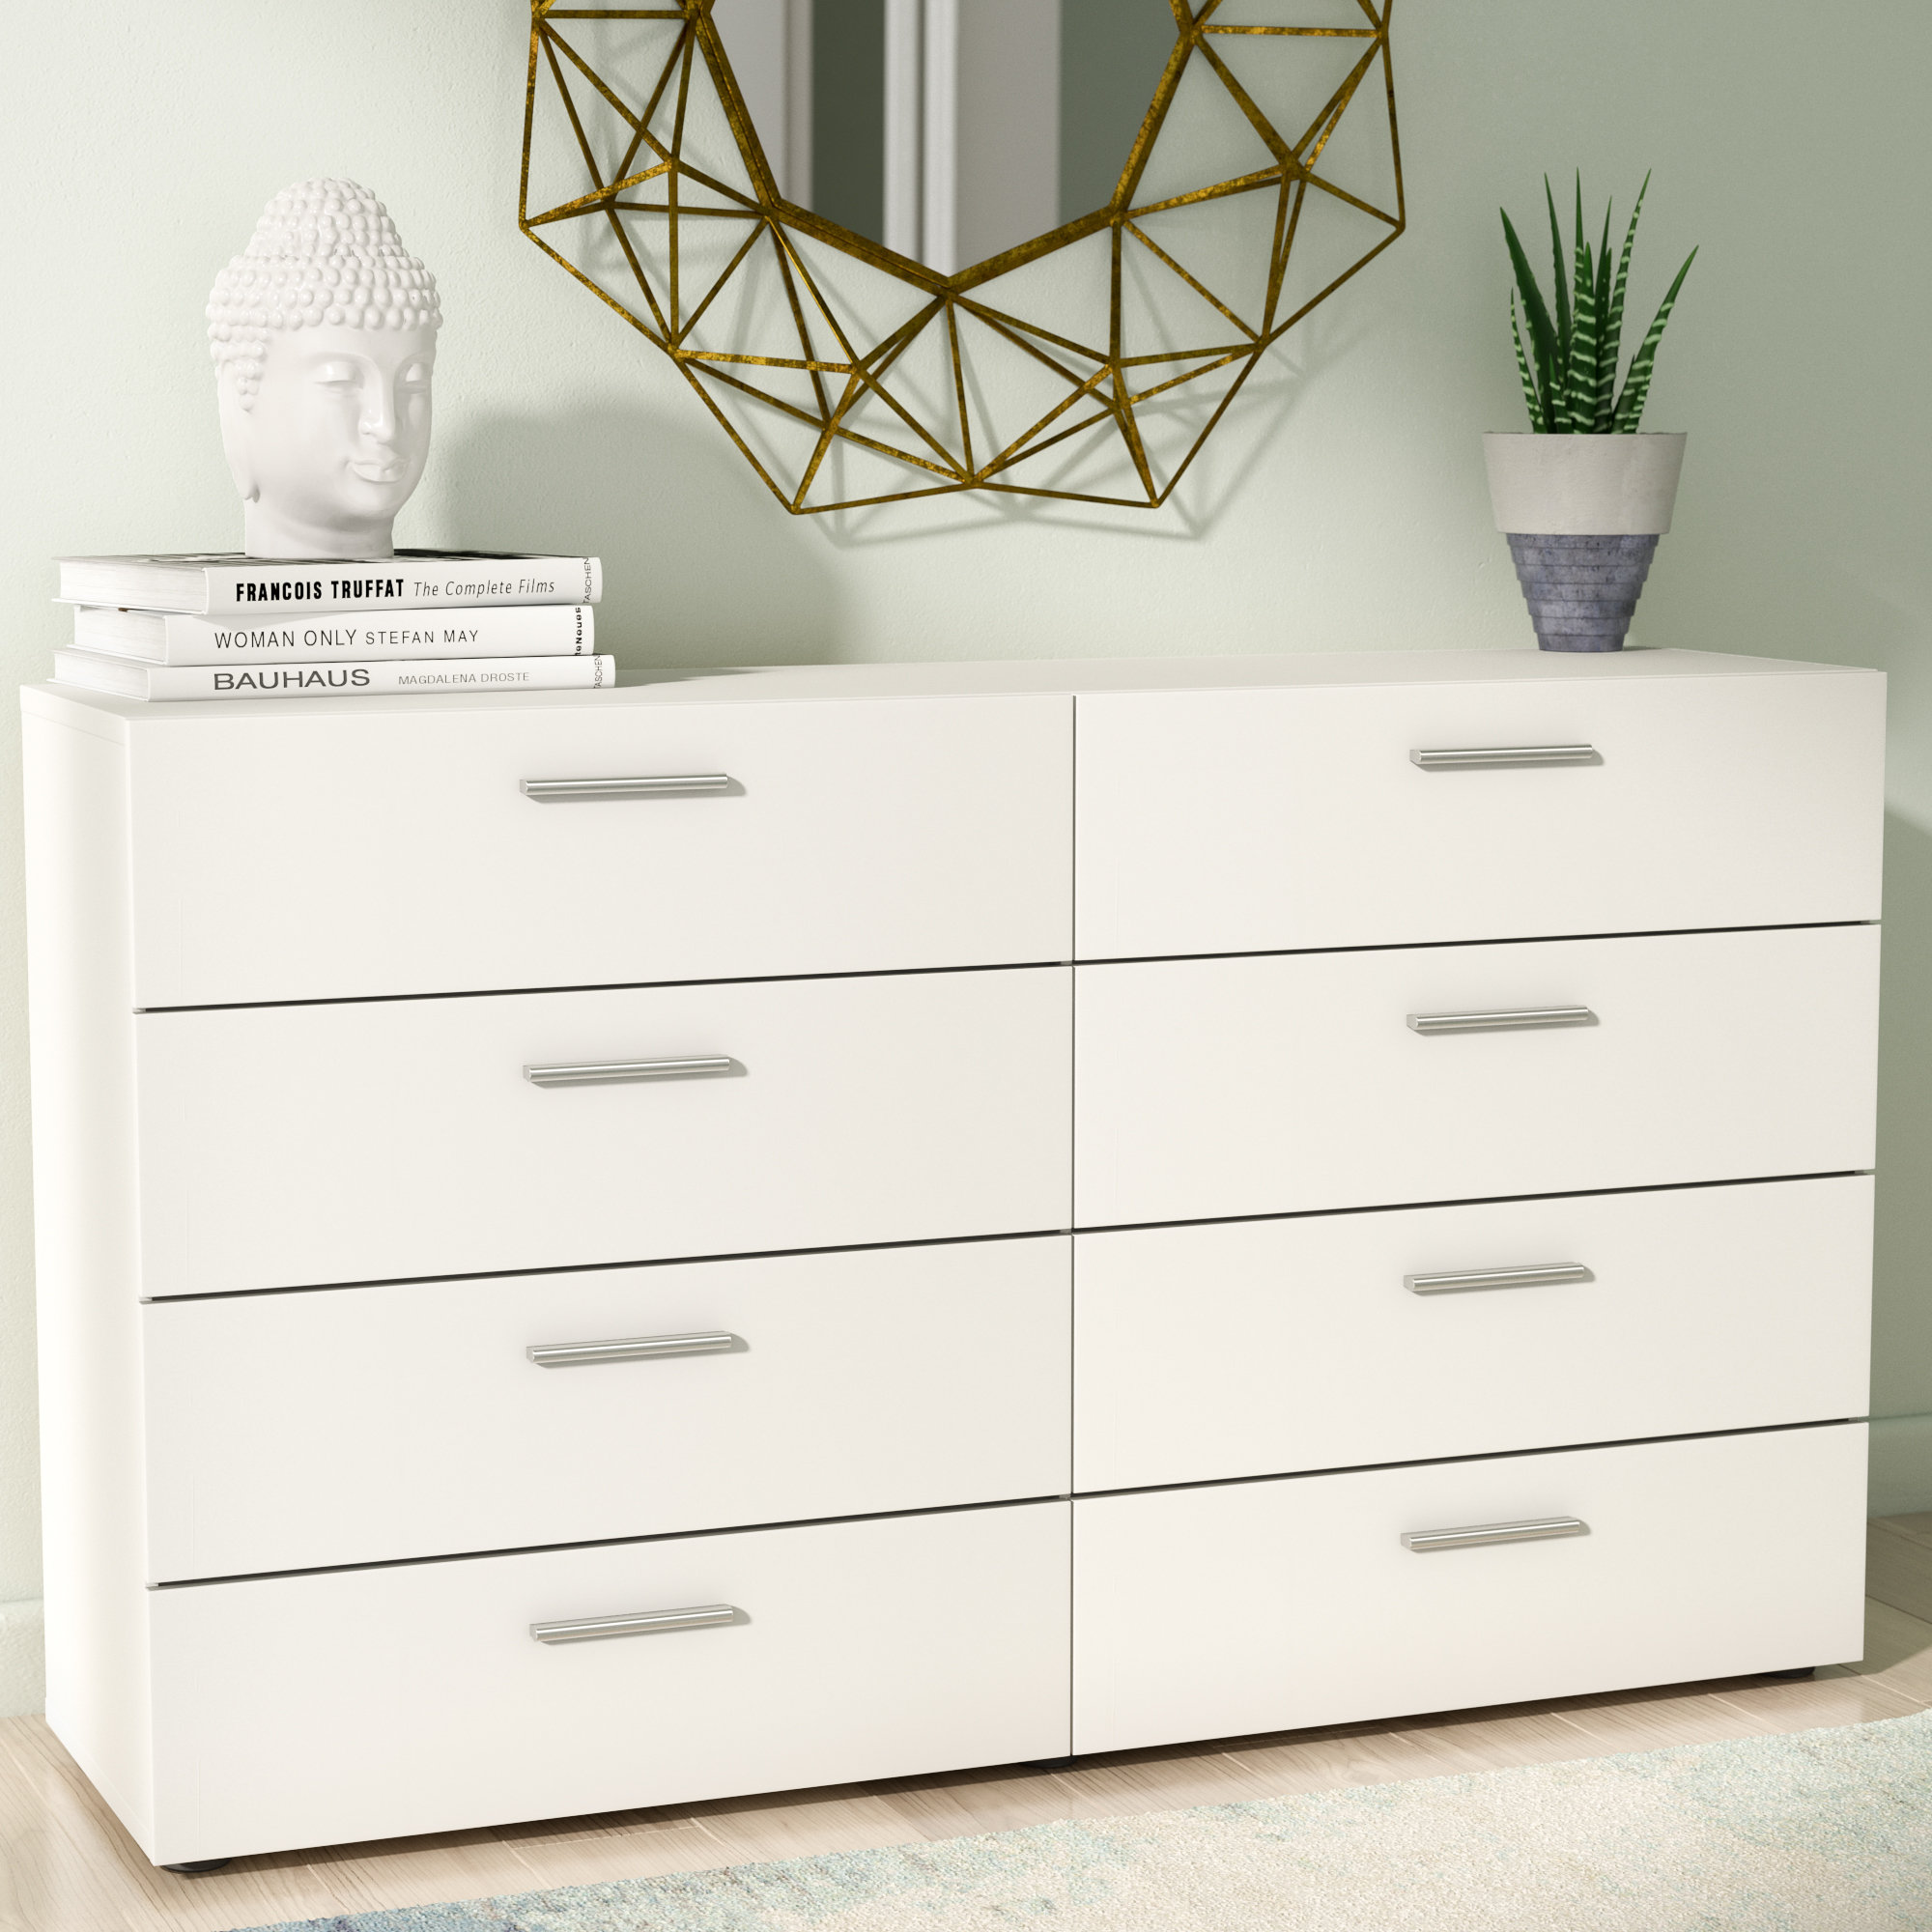 Dresser Dimensions How To Choose The Right One Wayfair